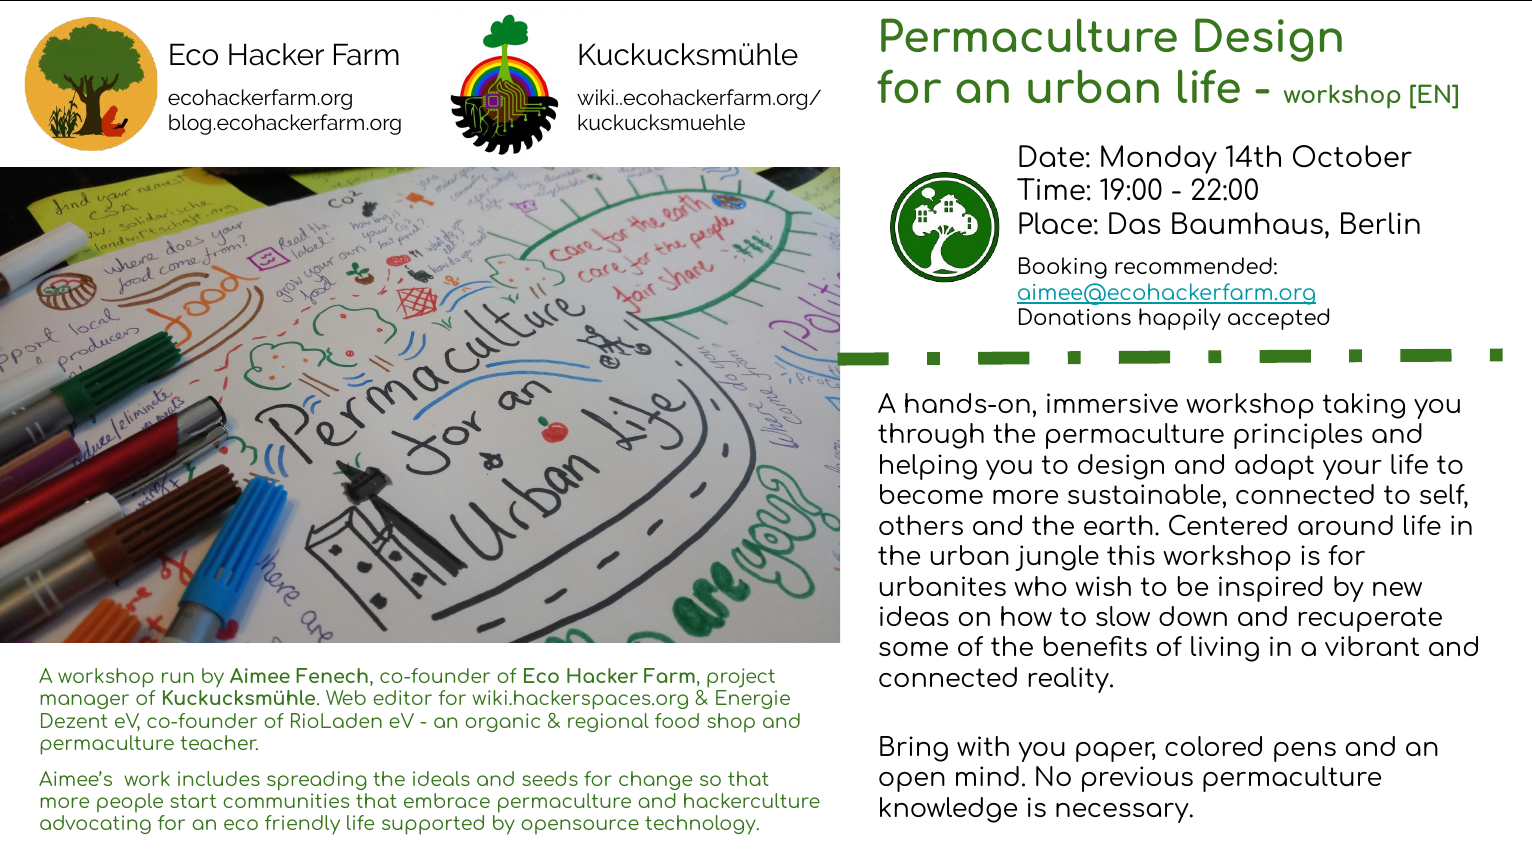 A hands-on and immersive workshop taking you through the permaculture principles and helps you to design and adapt your life to become more sustainable, connected to self, others and the earth. Centered around life in the urban jungle this workshop is for urbanites who wish to be inspired by new ideas on how to slow down and recuperate some of the benefits of living in a vibrant and connected reality.

Bring with you paper, colored pens and an open mind. No previous permaculture knowledge is necessary. Pre-booking is encouraged - [[mailto:aimee@ecohackerfarm.org|email]]

Donations happily accepted <3

Workshop run by Aimee Fenech, [[user:aimeejulia|Aimee]] is co-founder of [[start|Eco Hacker Farm]], originally from the world of wealth management and finance, she eventually quit her job for a more ecological lifestyle running an eco-community, teaching permaculture and advocating for open source and free software. 